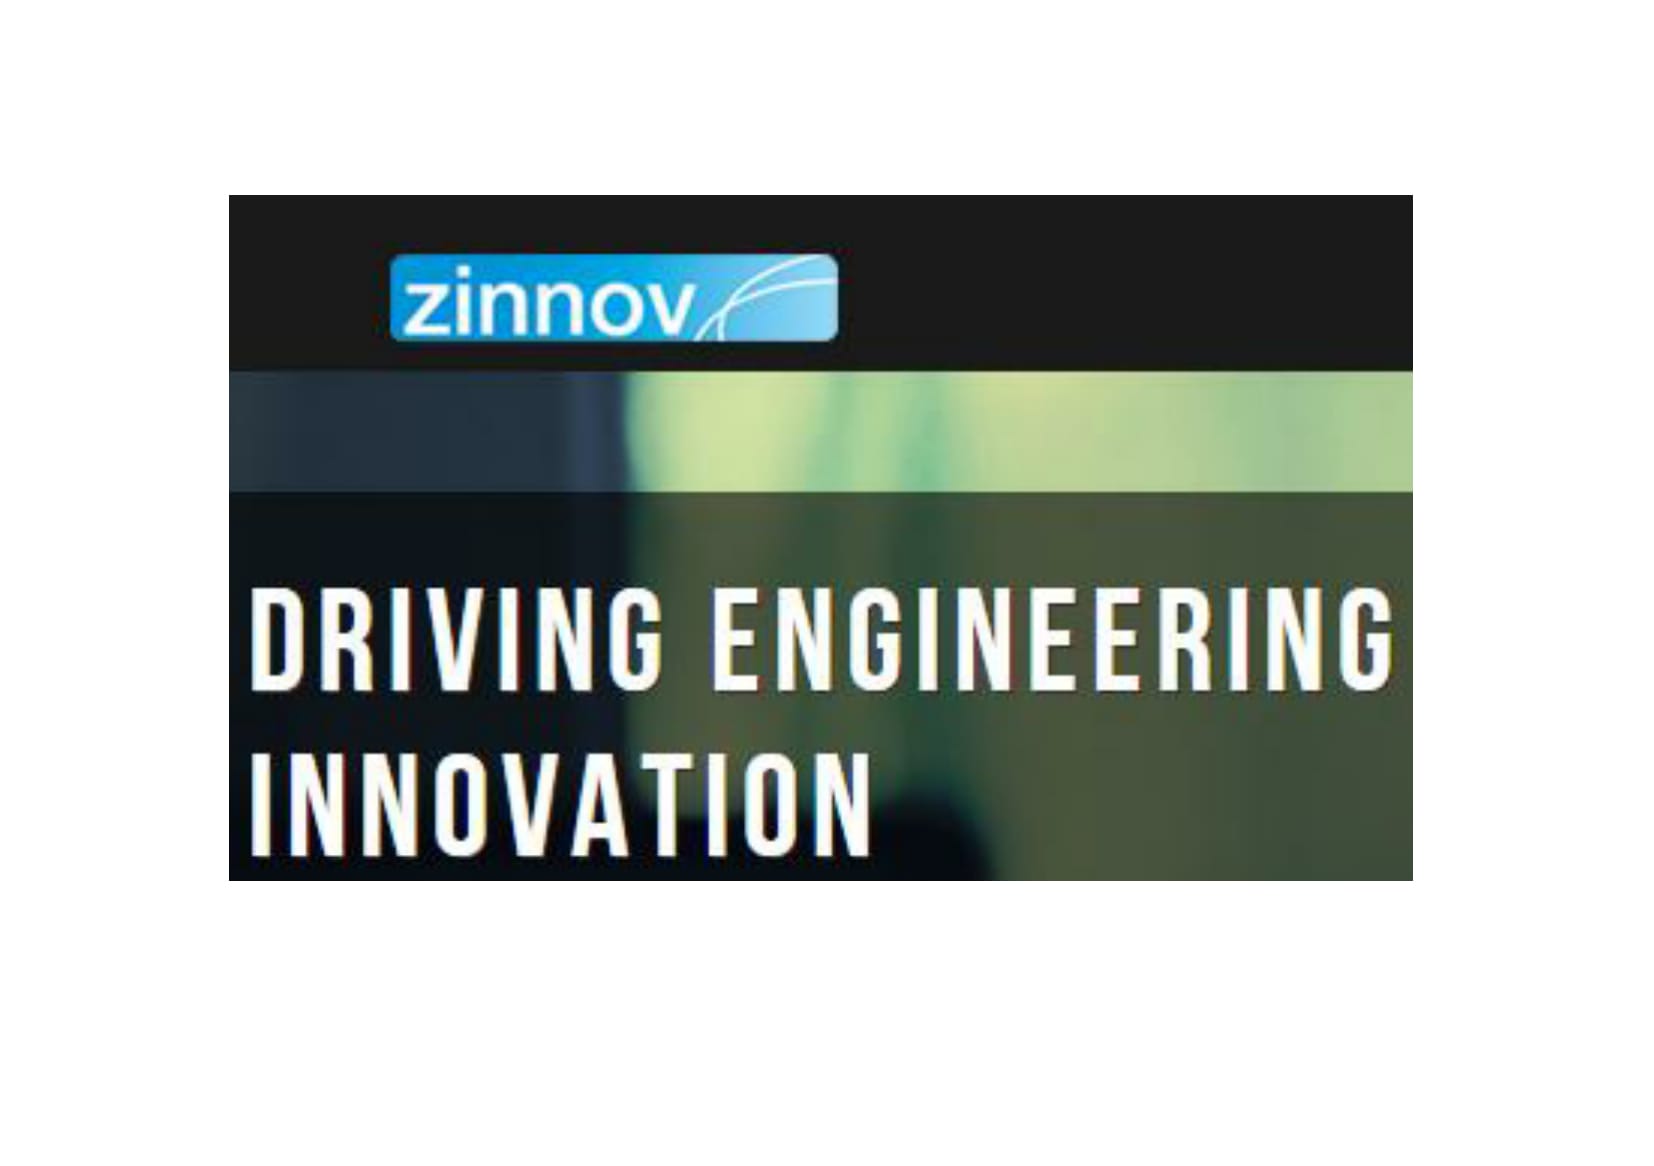 Founded in 2002, Zinnov is headquartered out of Bangalore with presence in Gurgaon, Houston and Silicon Valley. In over a decade, Zinnov has built in-depth expertise in digital and engineering practice areas. www.zinnov.com